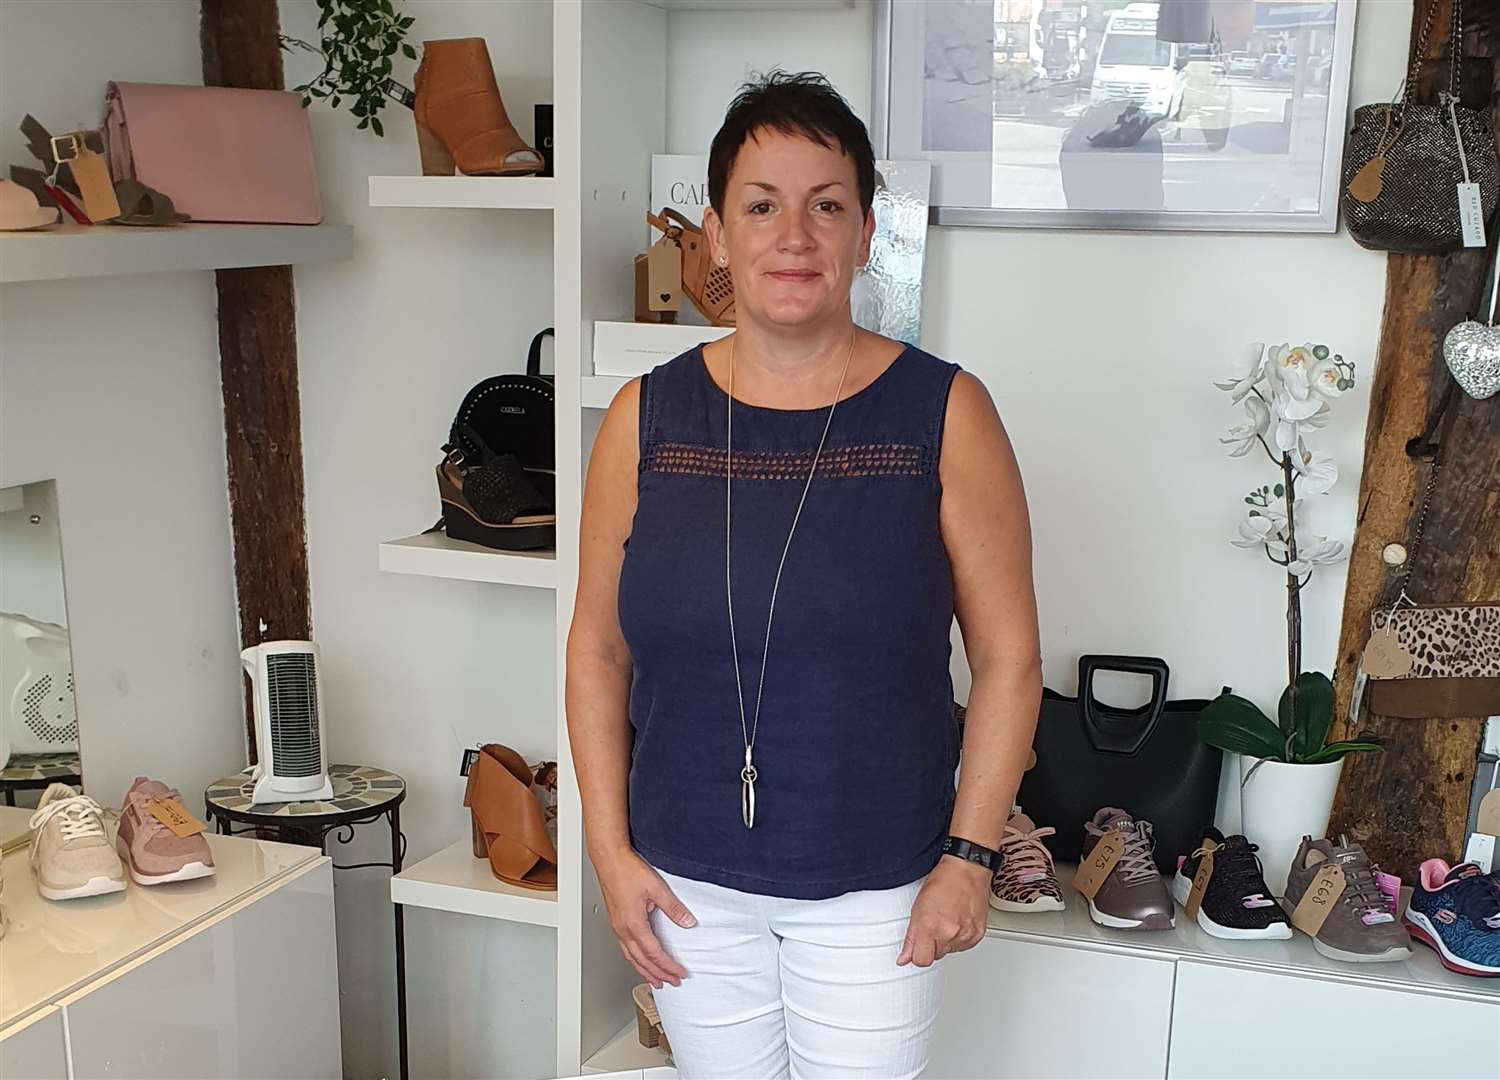 Teresa Hutchinson is owner of Soles with Heart shoe shop in Swan Street, West Malling